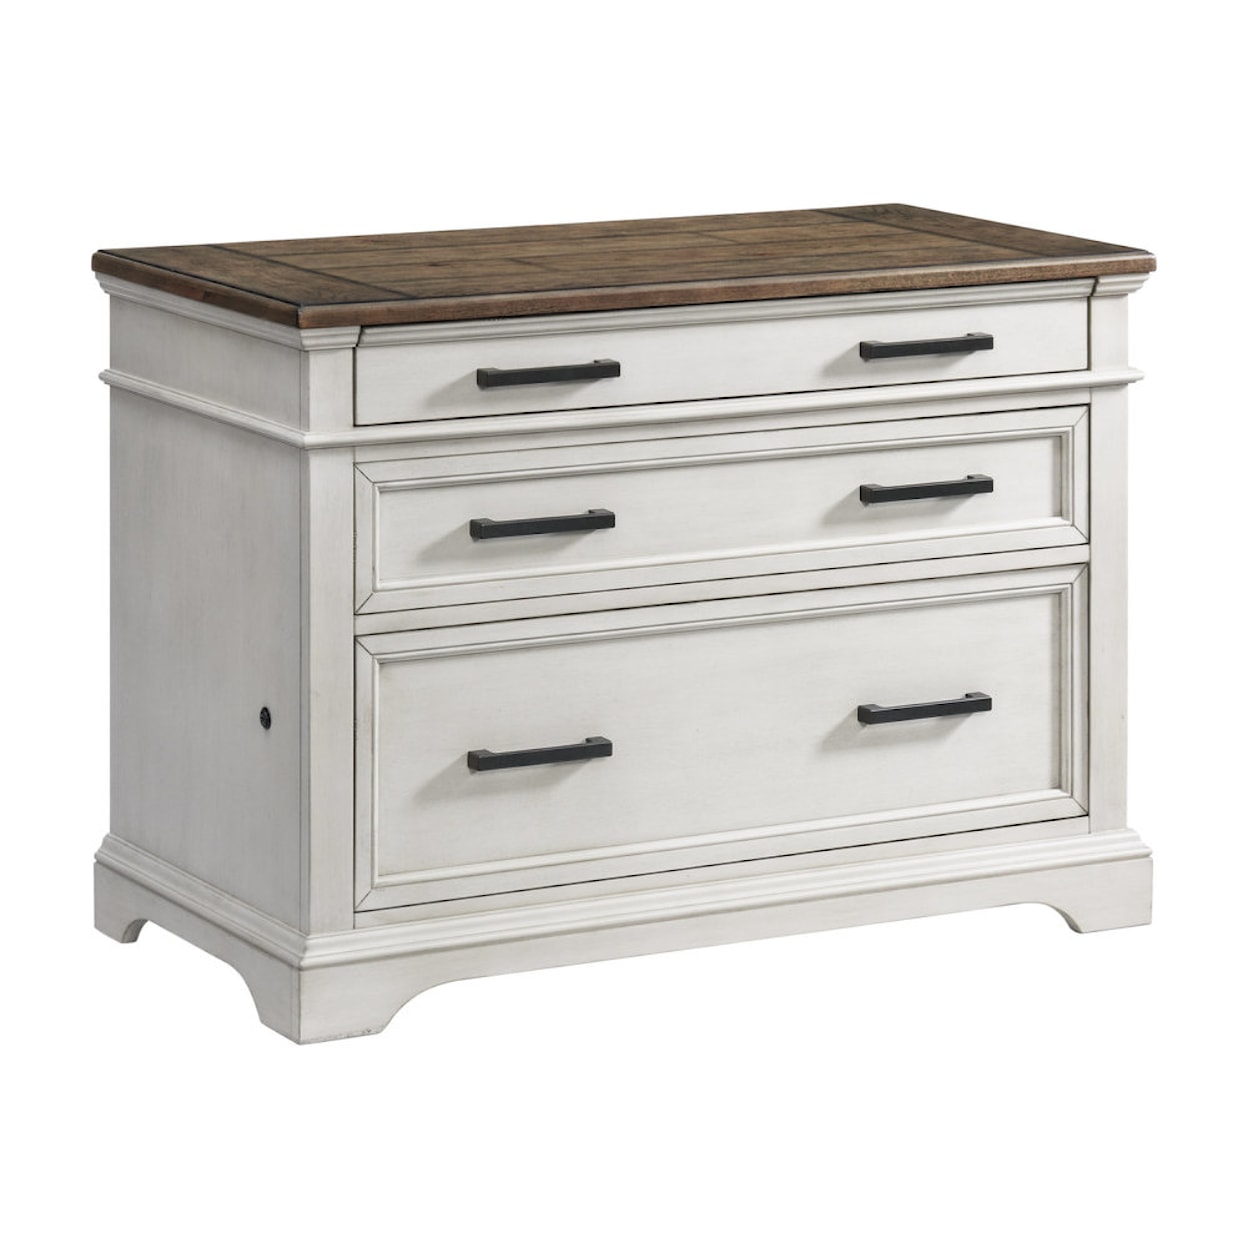 Intercon Francis Francis Lateral File Cabinet